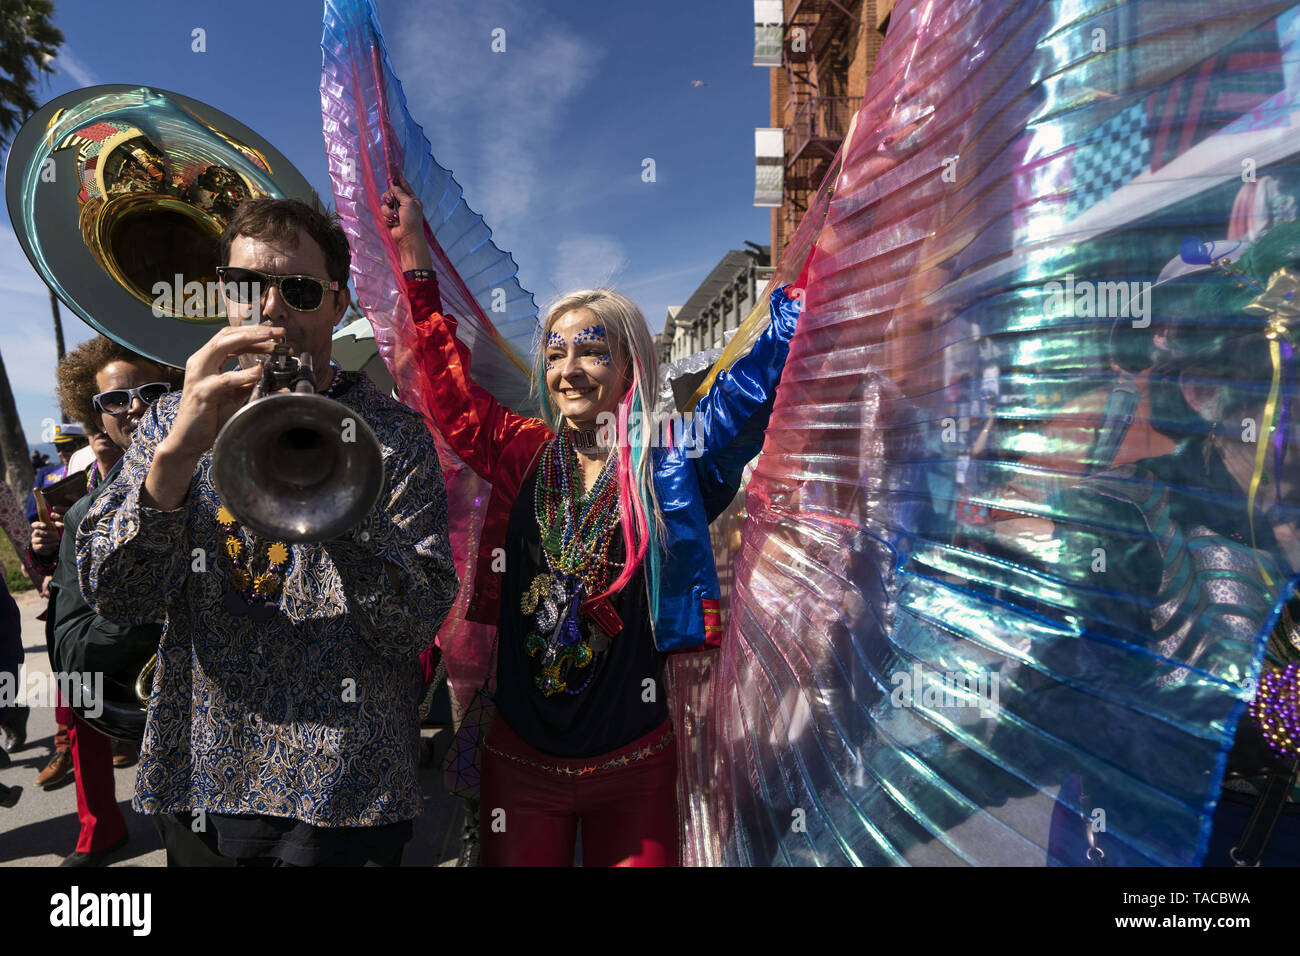 Los Angeles, USA. 23rd Feb, 2019. Participants are seen during the parade in Los Angeles.Mardi Gras also known as Fat Tuesday is a cultural Carnival that is celebrated throughout Latin America and in some places in the U.S. most famously in New Orleans. Credit: Ronen Tivony/SOPA Images/ZUMA Wire/Alamy Live News Stock Photo